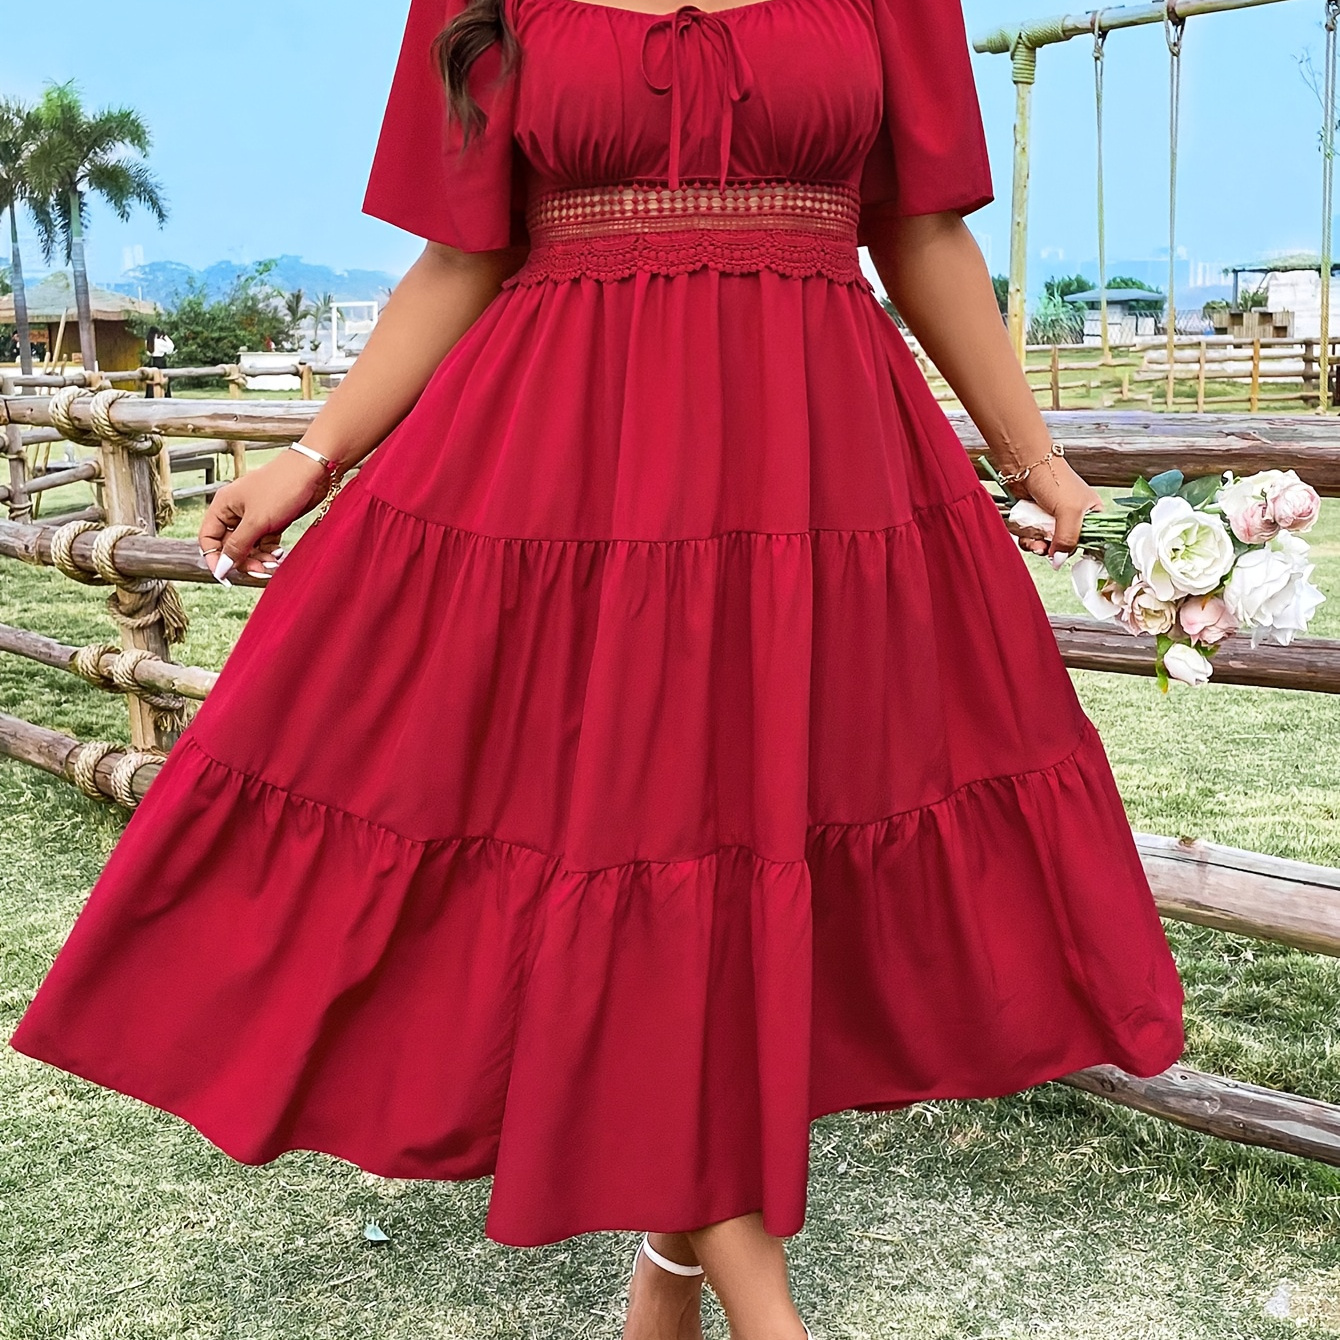 

Plus Size Tie Front Shirred Tiered Dress, Elegant Short Sleeve Dress For Spring & Summer, Women's Plus Size Clothing